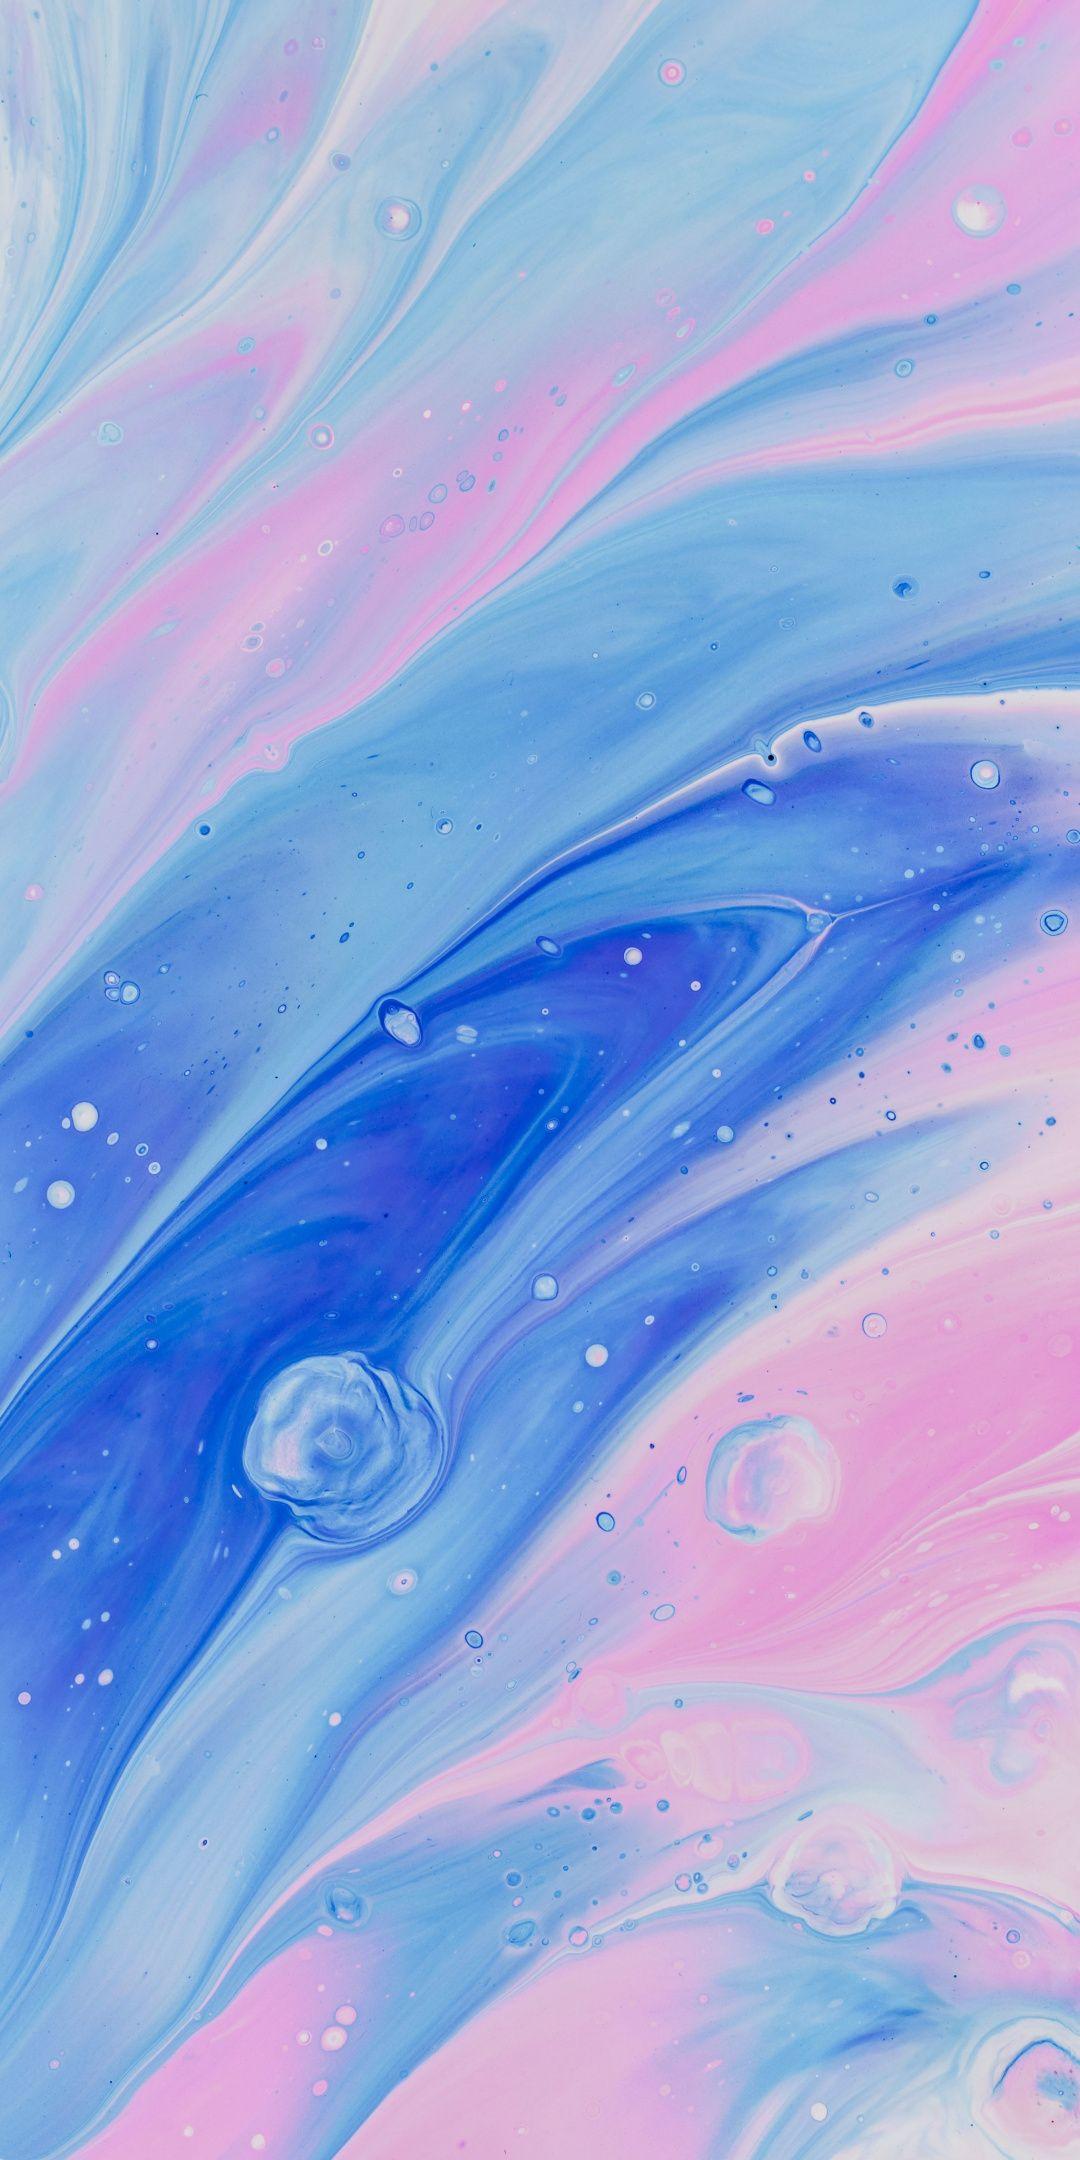 Download 1080x2160 Wallpaper Texture, Lines, Stains, Blue Pink, Honor 7X, Honor 9 Lite, Honor View 20. Pink Wallpaper Texture, Art Wallpaper, IPhone Wallpaper